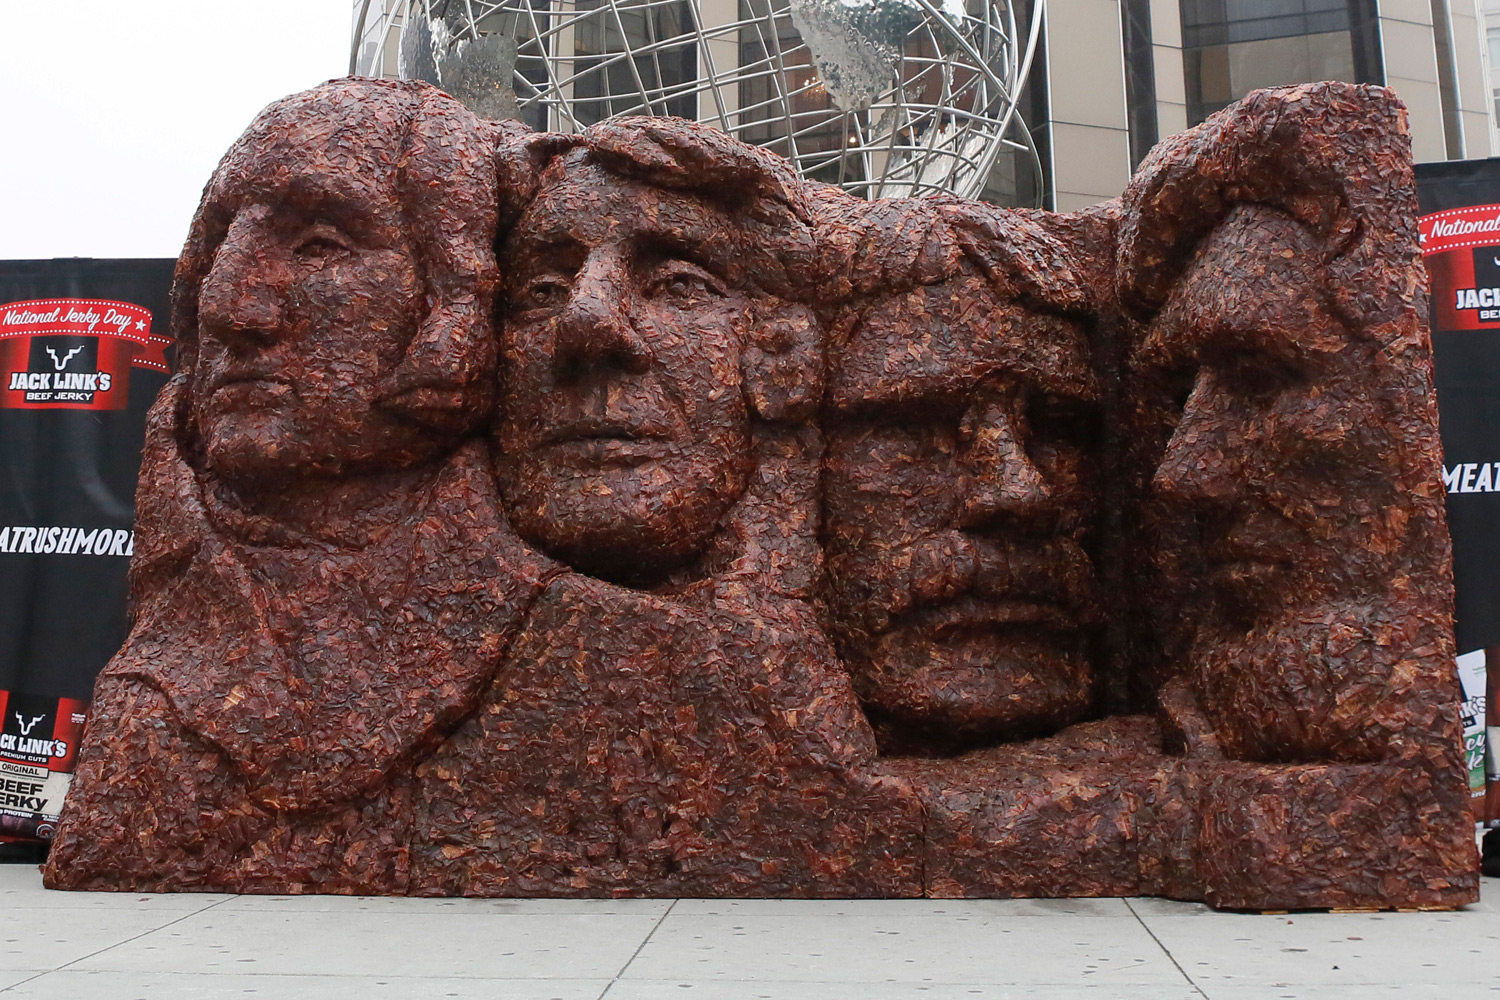 Jack Link’s debuts Meat Rushmore, a 13-foot tall, 17-foot wide meat replica of Mount Rushmore National Memorial, on display Thursday, June 12, 2014, in New York City's Columbus Circle. (Stuart Ramson / Invision for Jack Link's / AP)